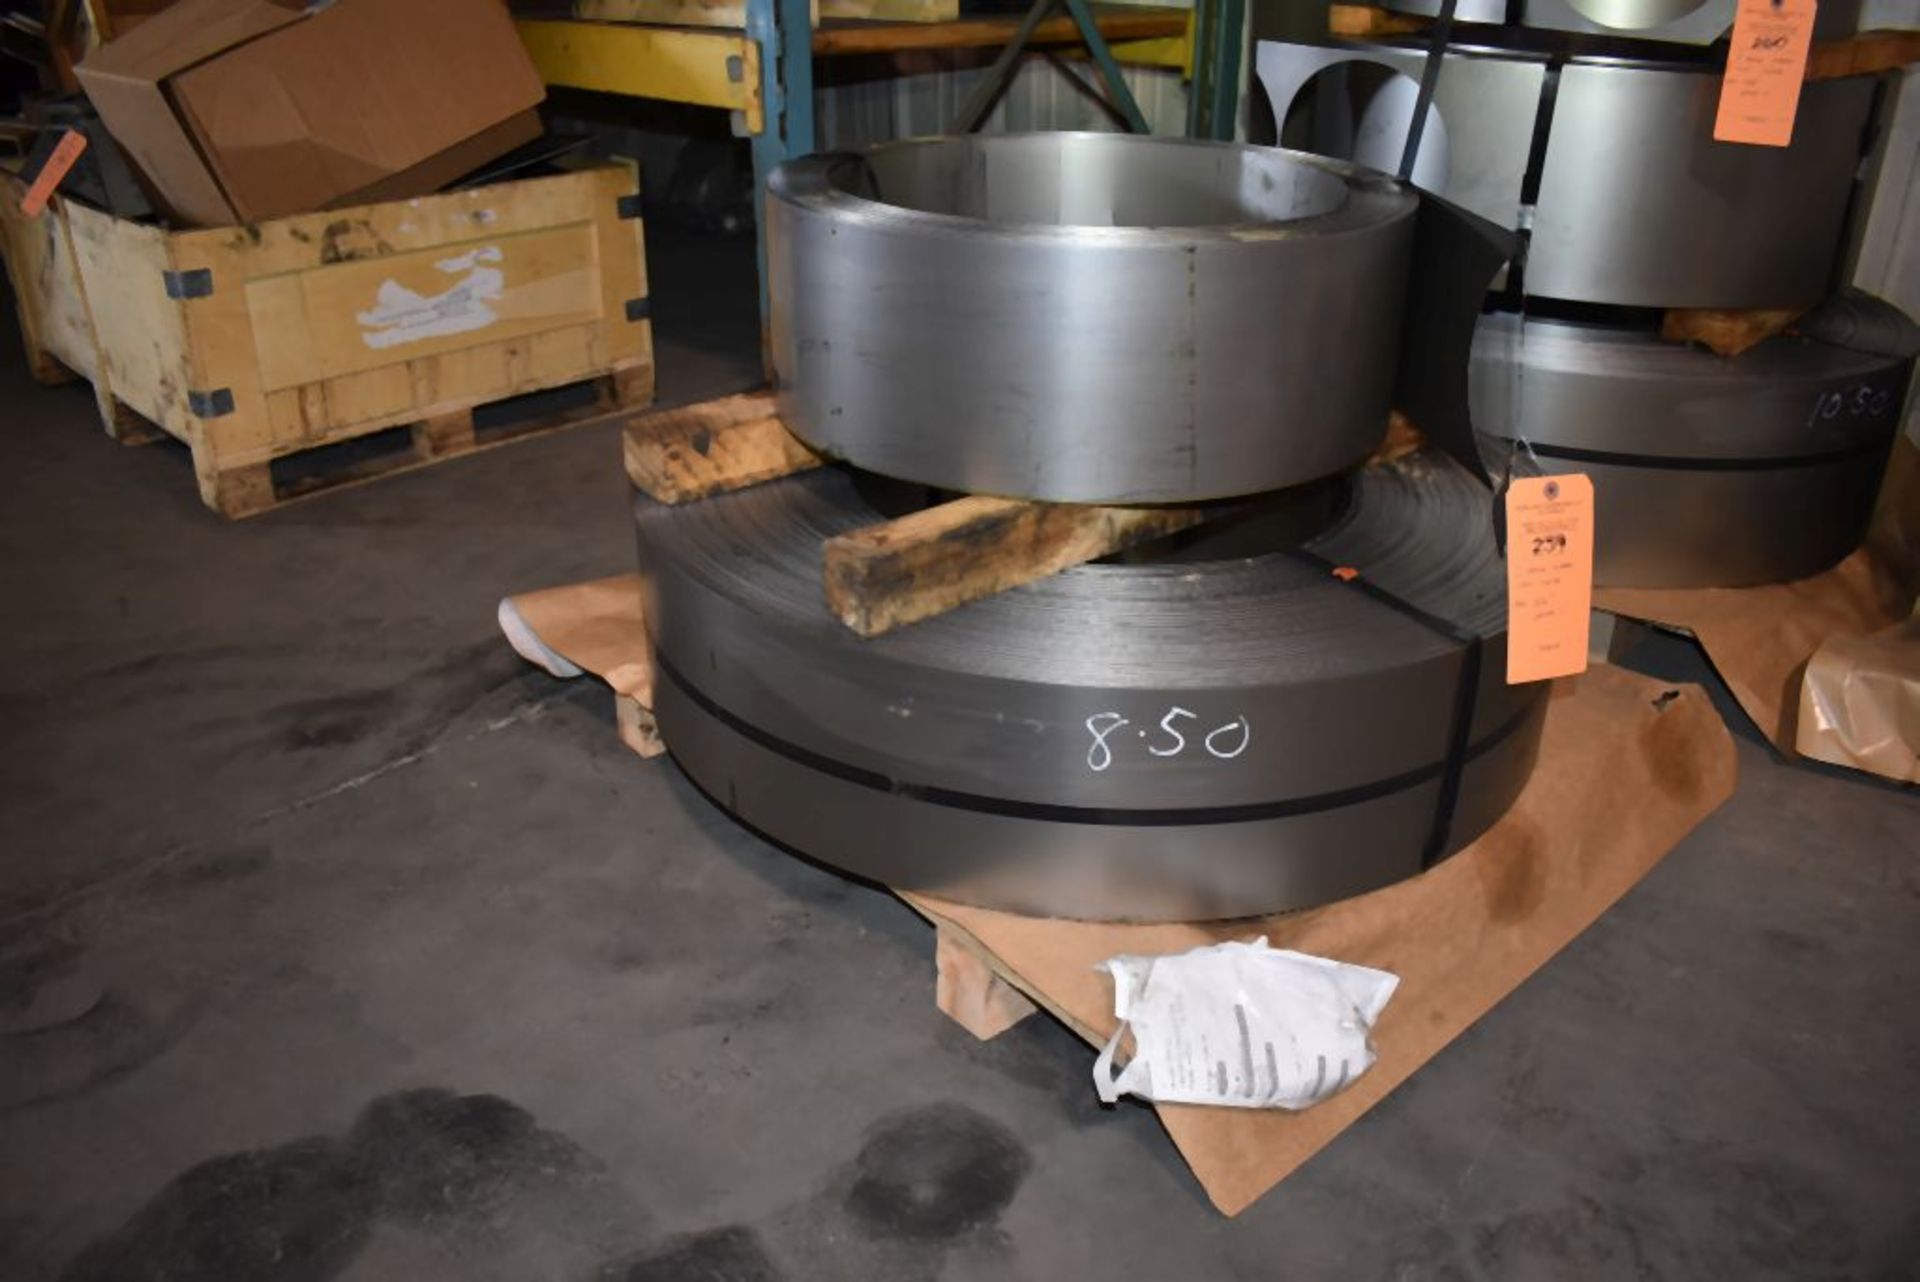 (2) ROLLS OF STEEL COIL STOCK, ALL 8 1/2"